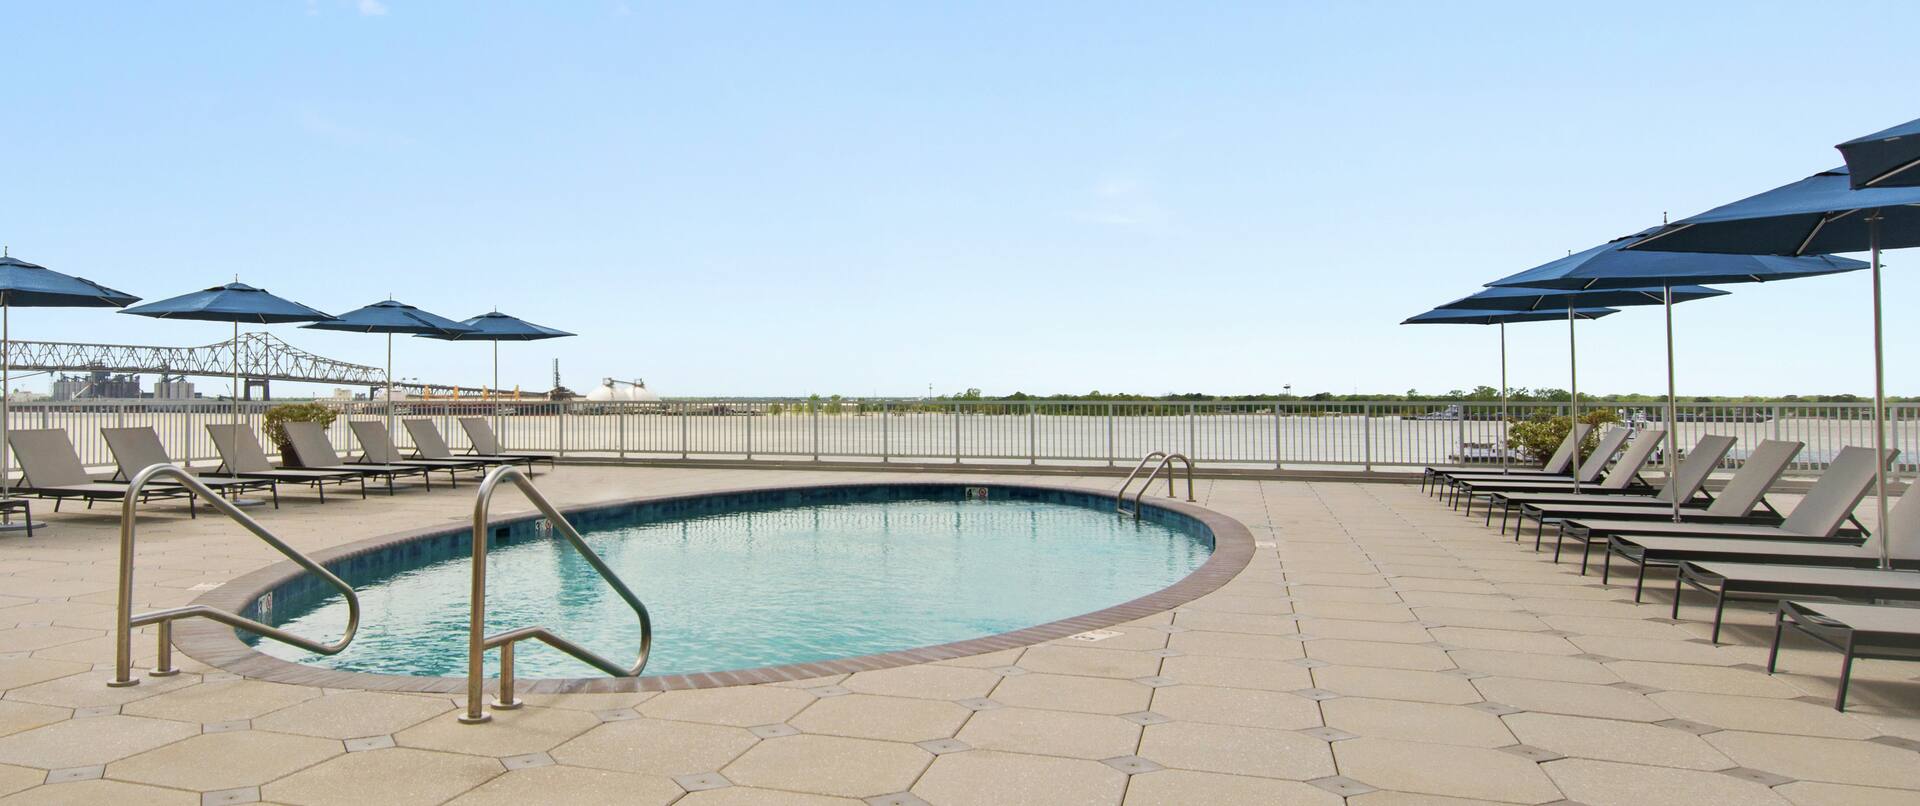 Outdoor Pool Overlooking the Mississippi River